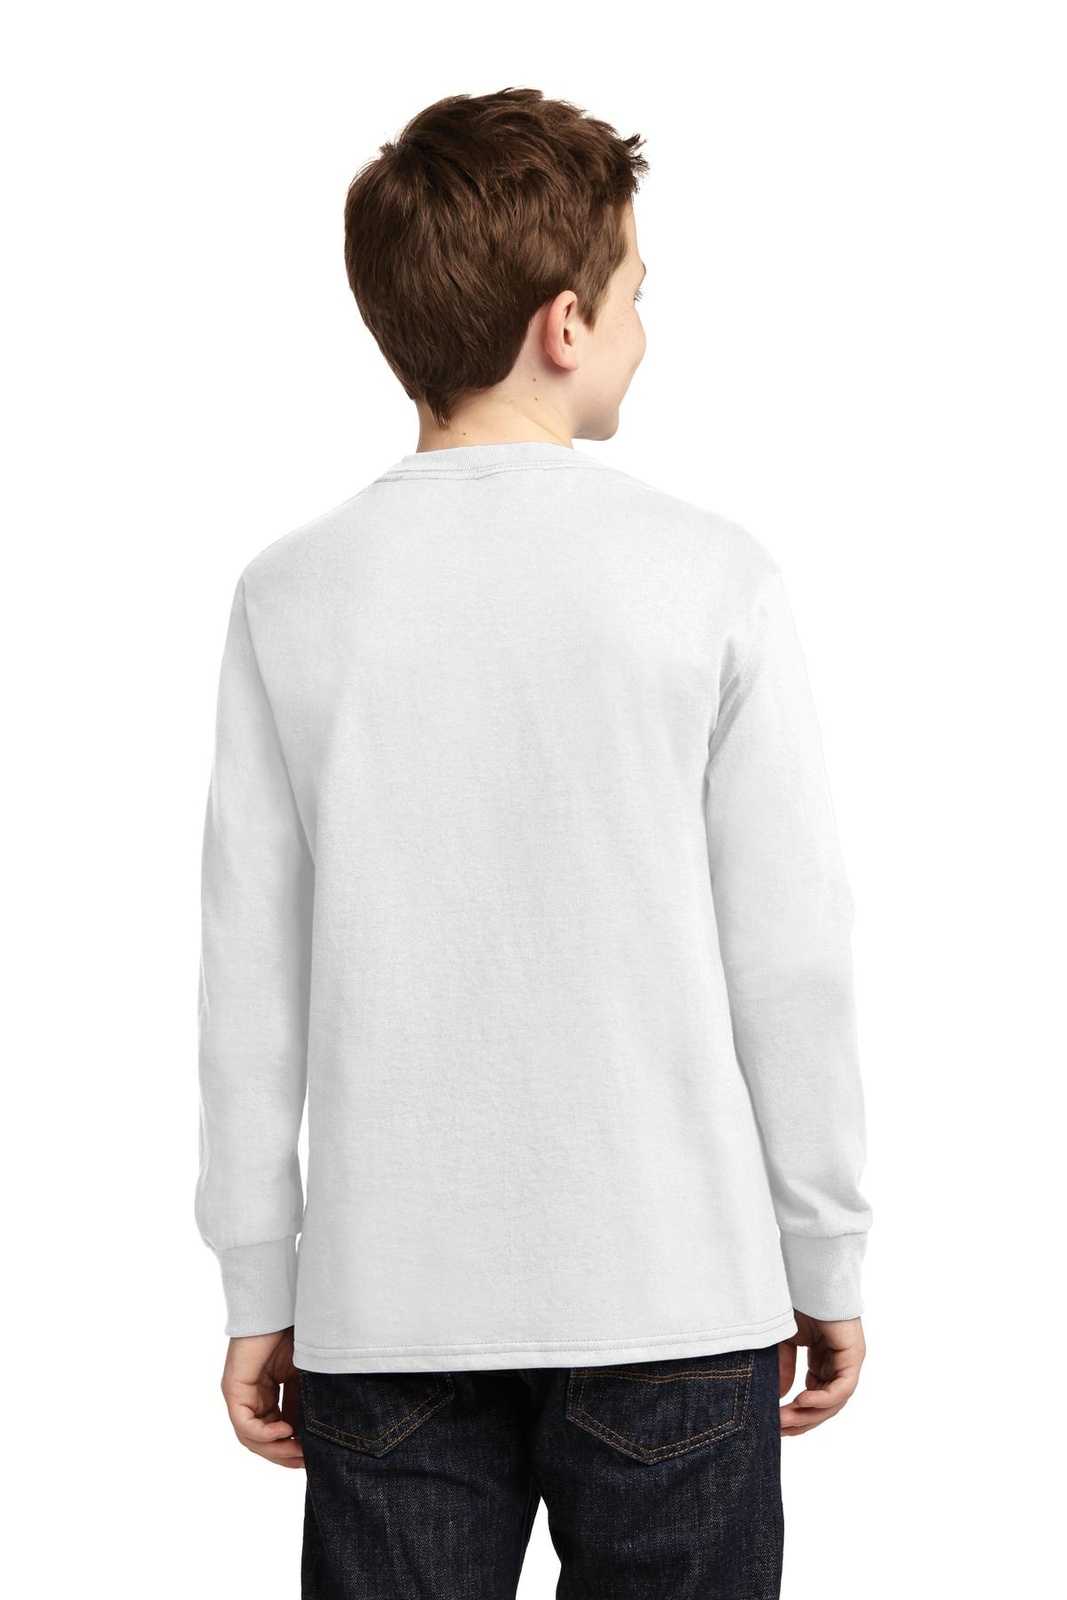 Port & Company PC54YLS Youth Long Sleeve Core Cotton Tee - White - HIT a Double - 1